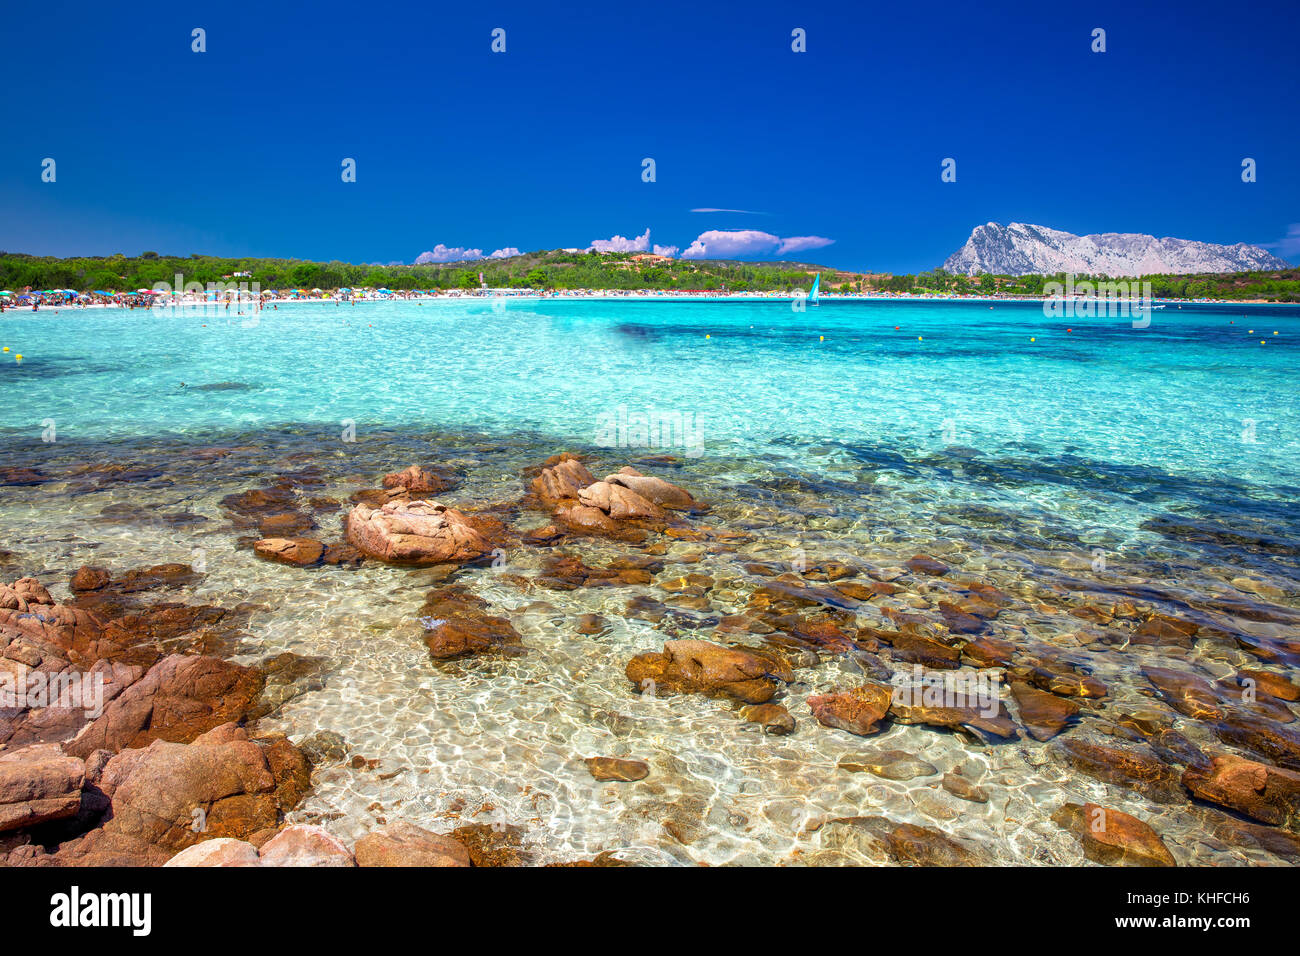 Cala Brandinchi beach with Isola Travolara in the background, red stones and azure clear water, Sardinia, Italy Stock Photo